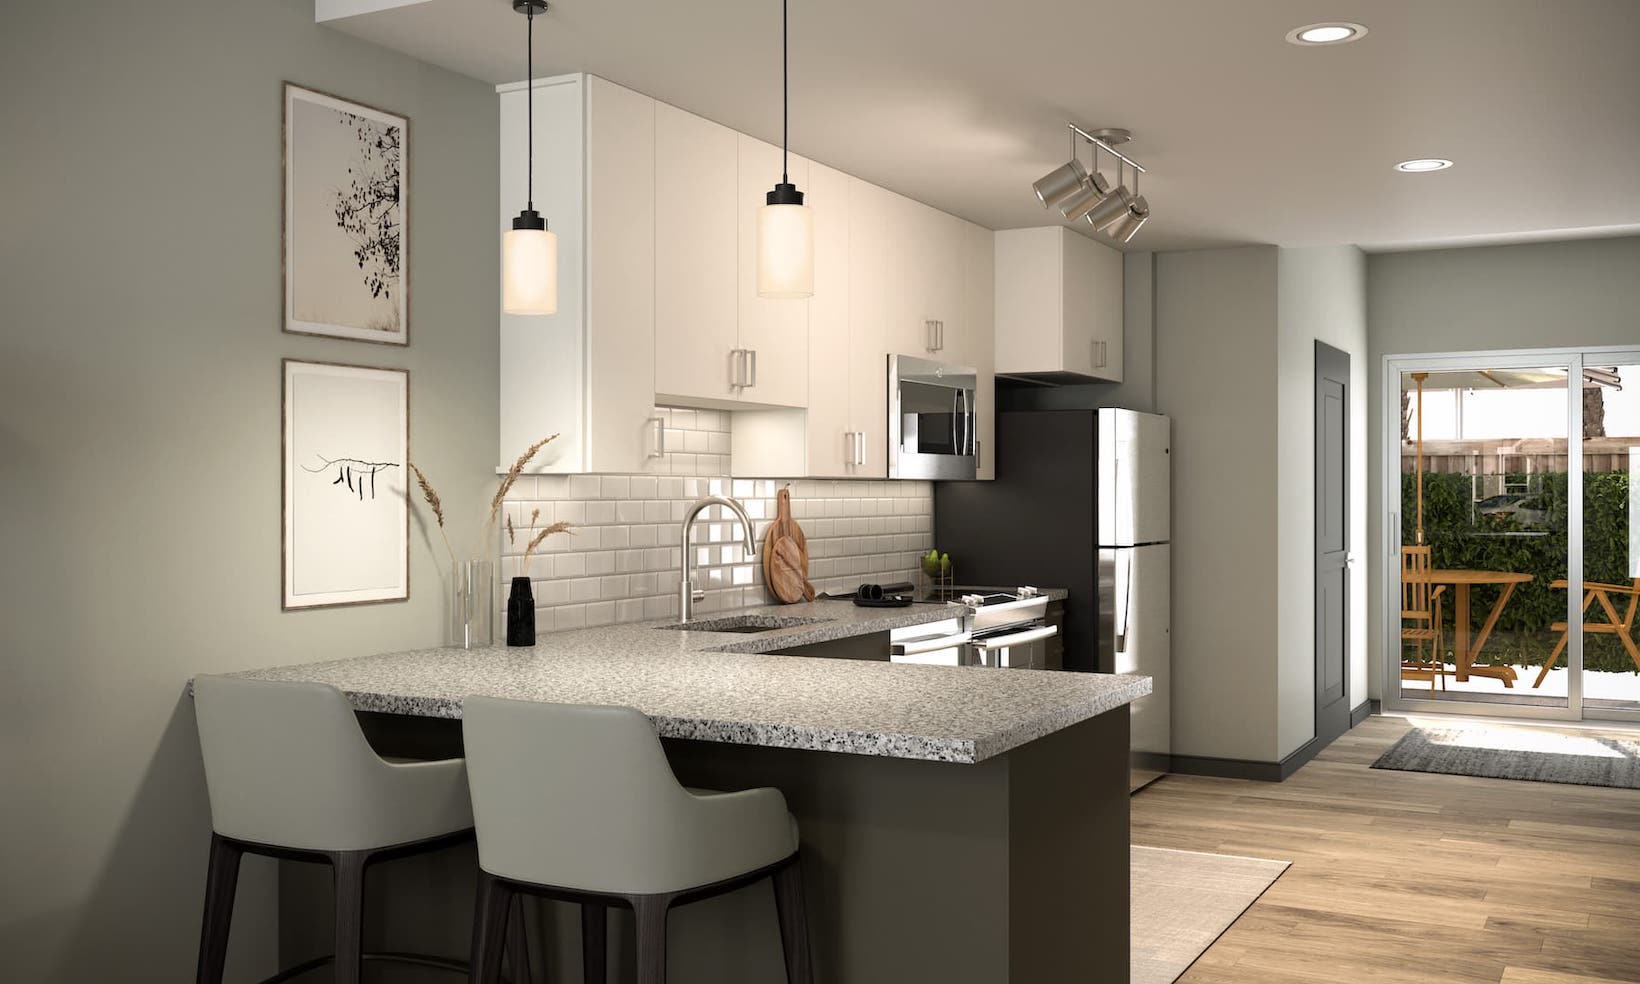 kitchen with an island and modern appliances